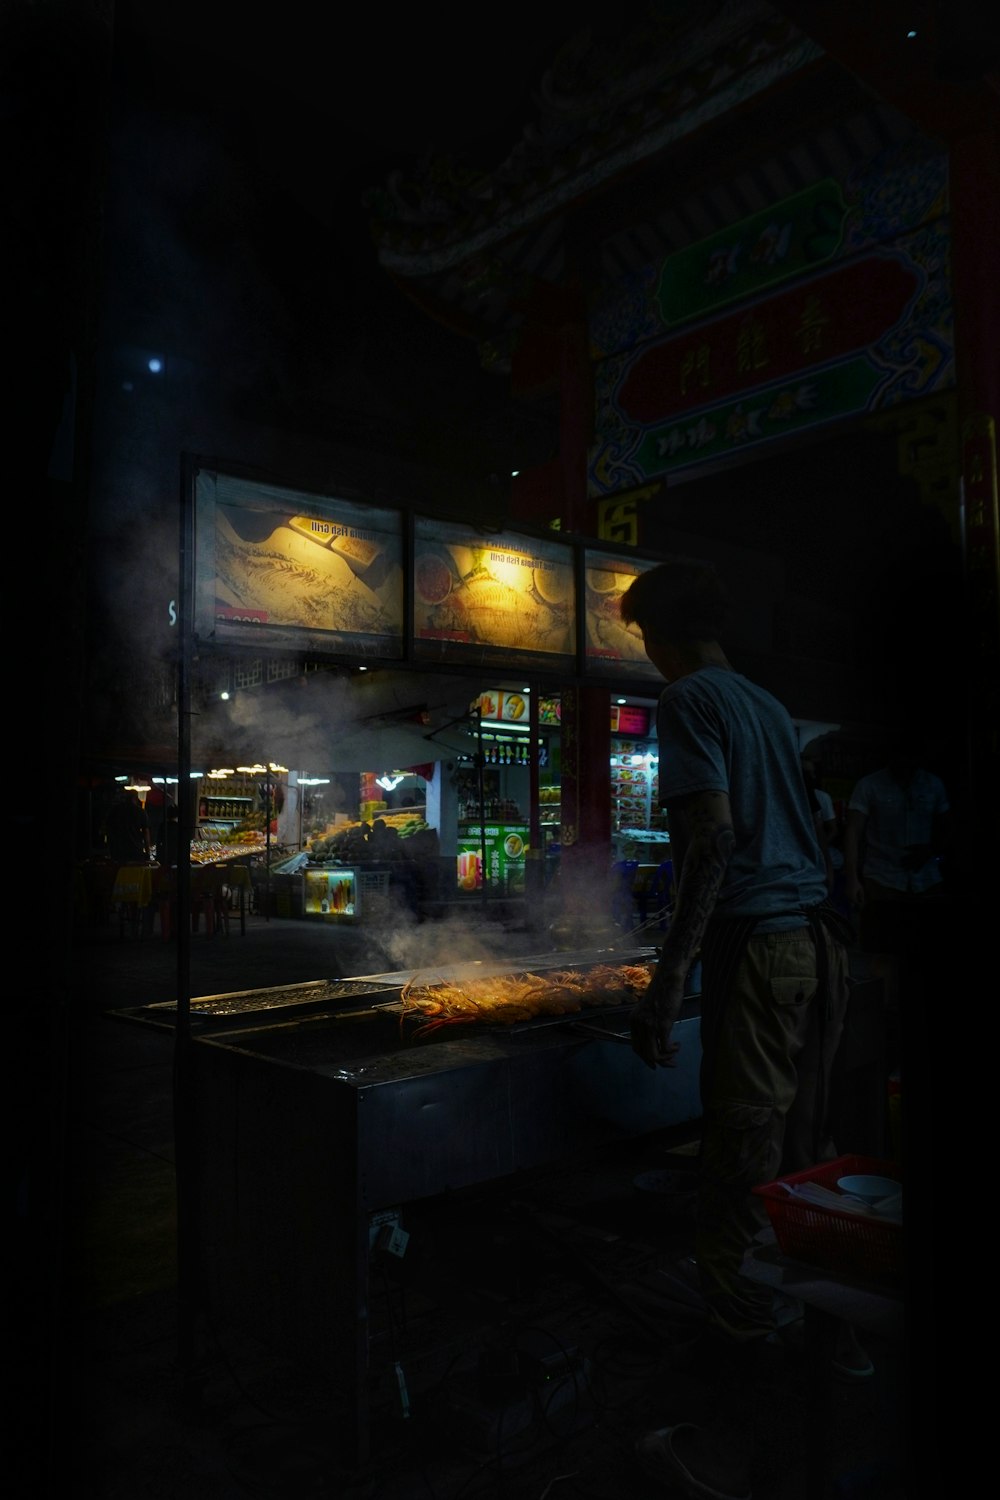 a man standing in front of a food stand at night